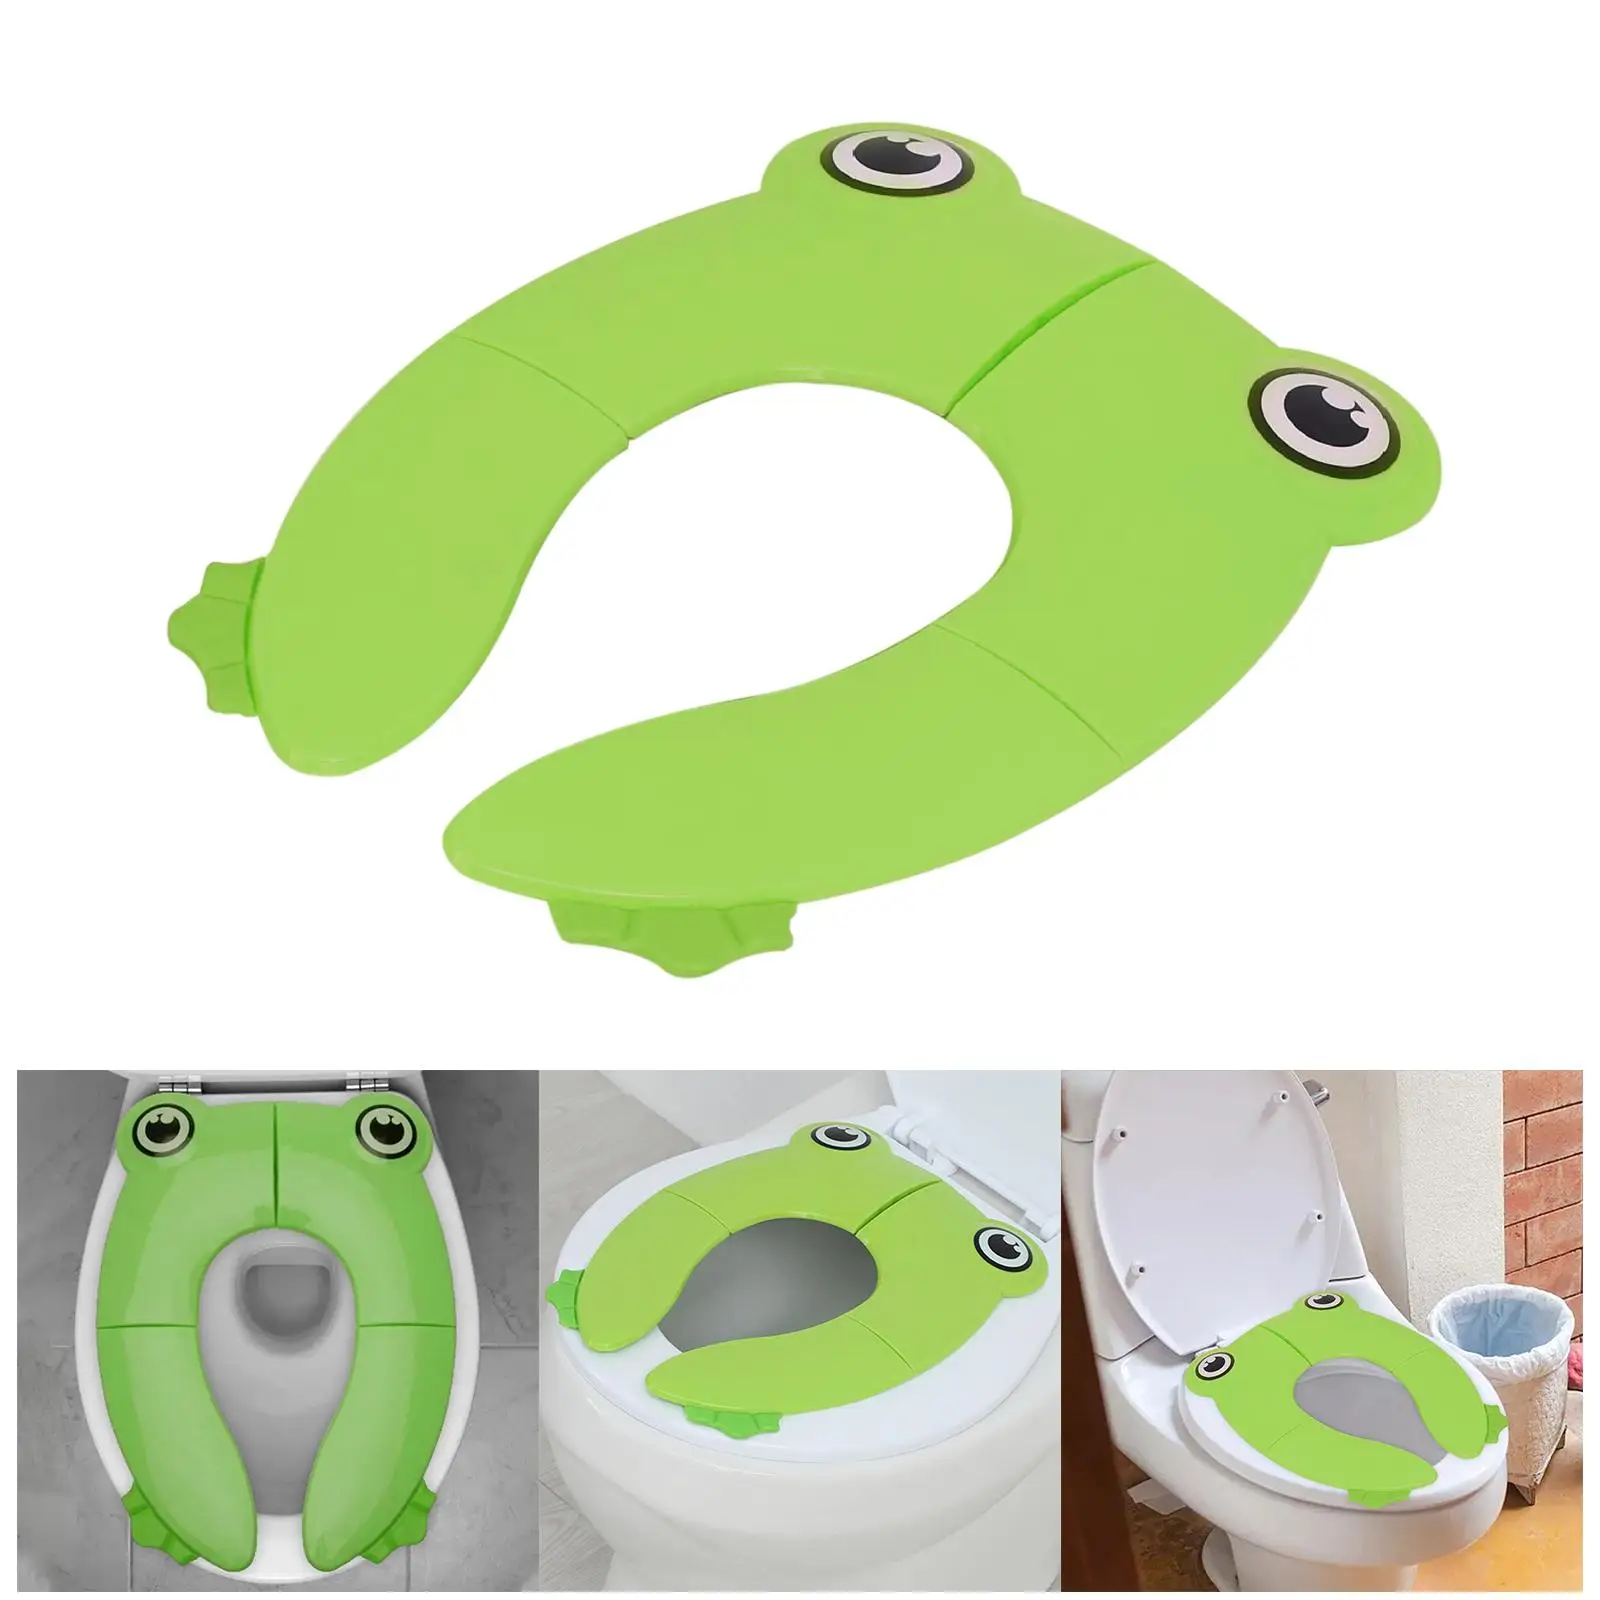 Toilet Seat Mat Oval Durable Reusable Foldable Portable Comfortable Potty Seat Pads for Camping Home Use Traveling Toddler Kids